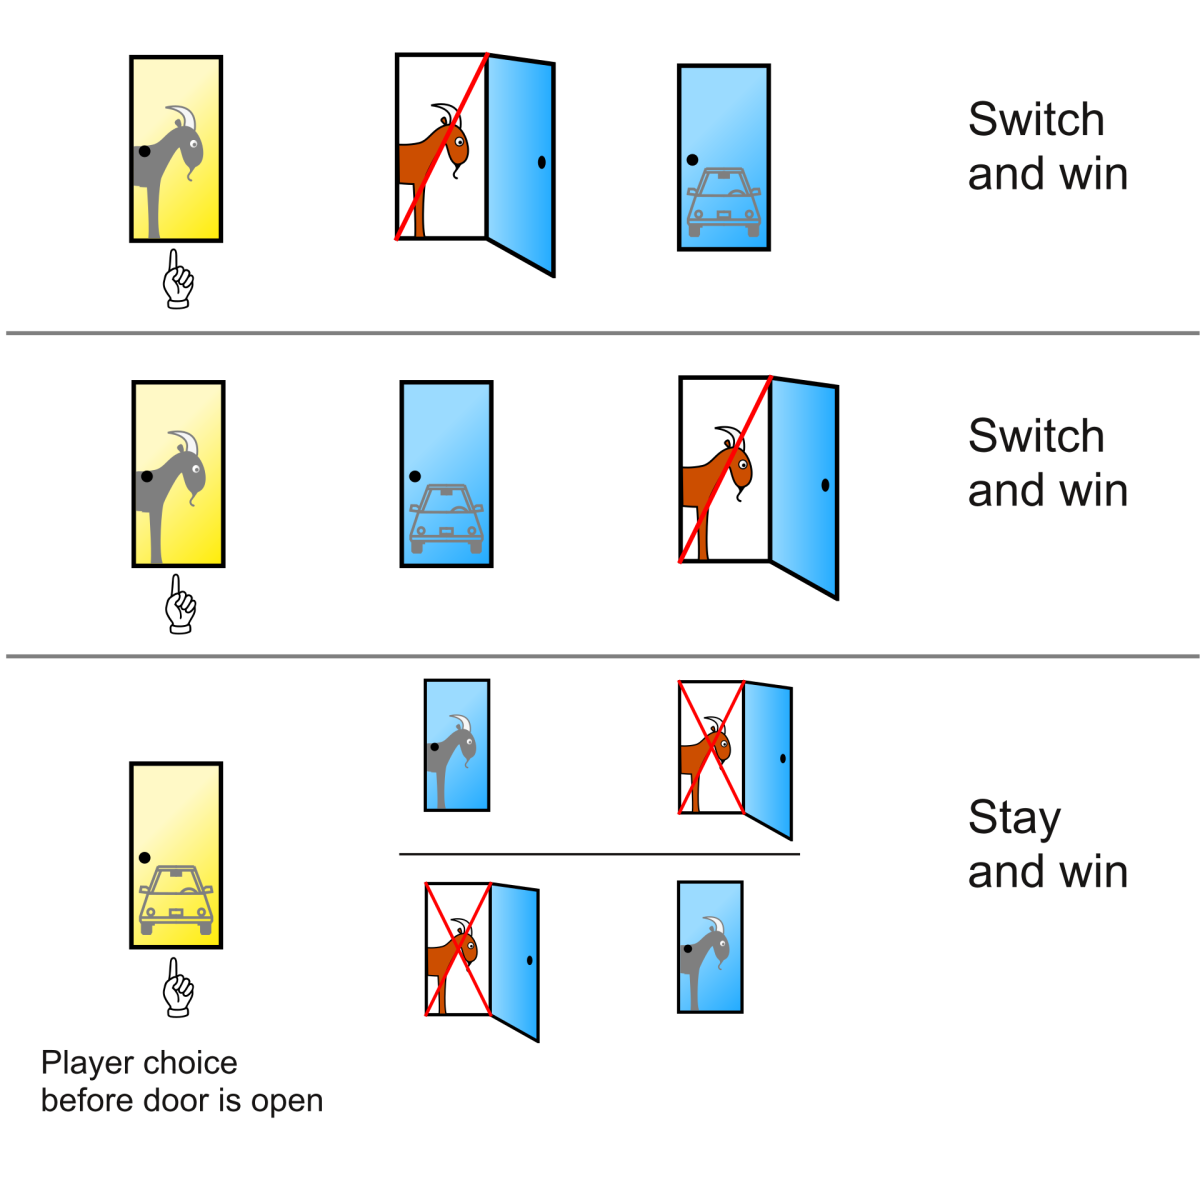 In all possible configurations of the game, the player wins two times out of three by switching doors.